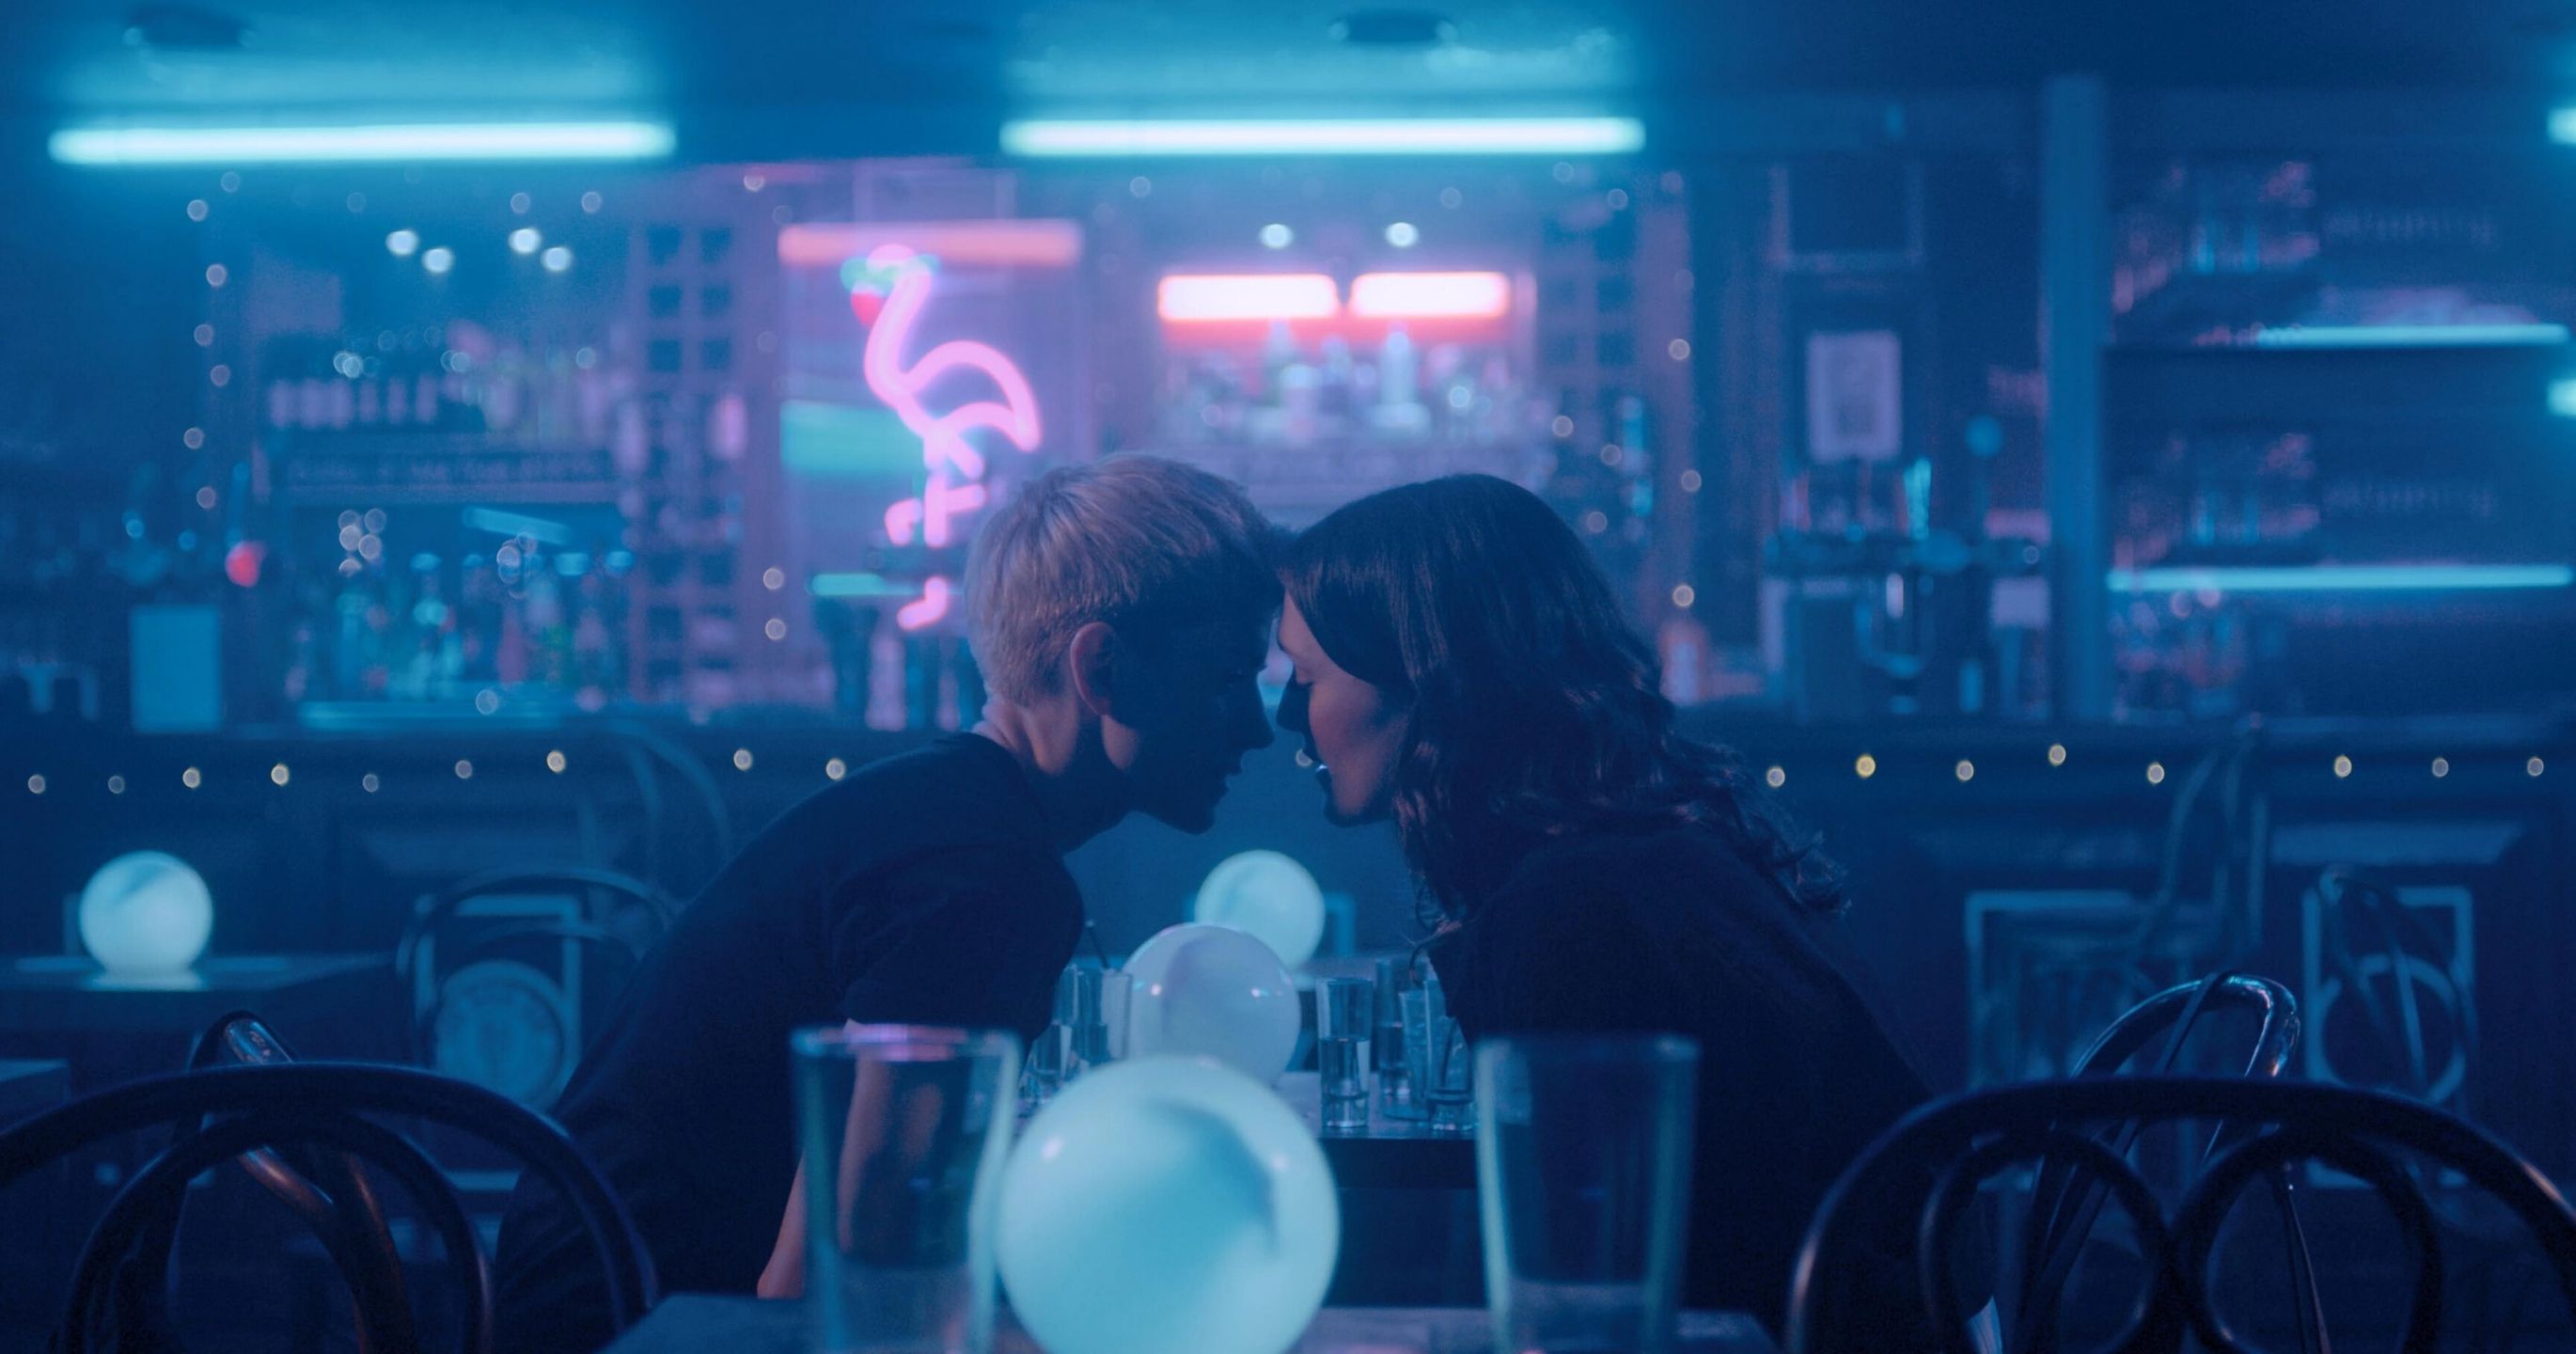 Two woman leaning into kiss in an empty bar